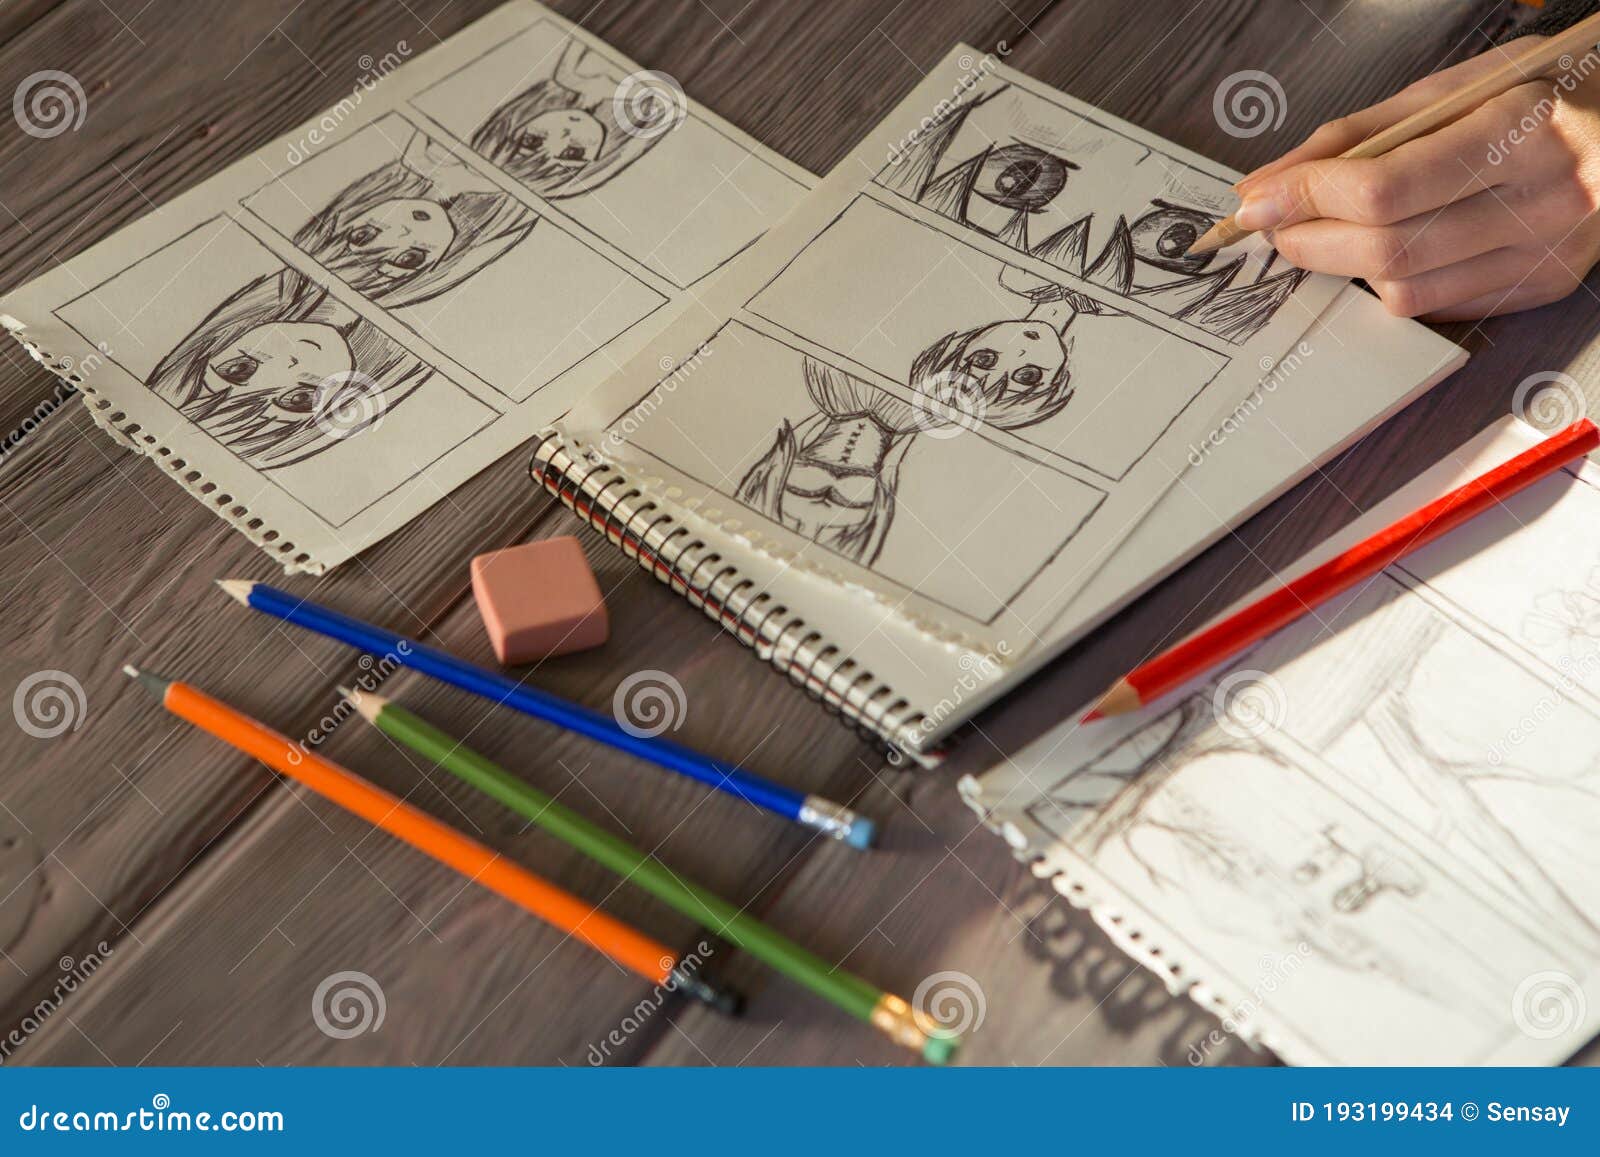 Artist Drawing An Anime Comic Book In A Studio Stock Photo  Download Image  Now  Drawing  Activity Manga Style Drawing  Art Product  iStock